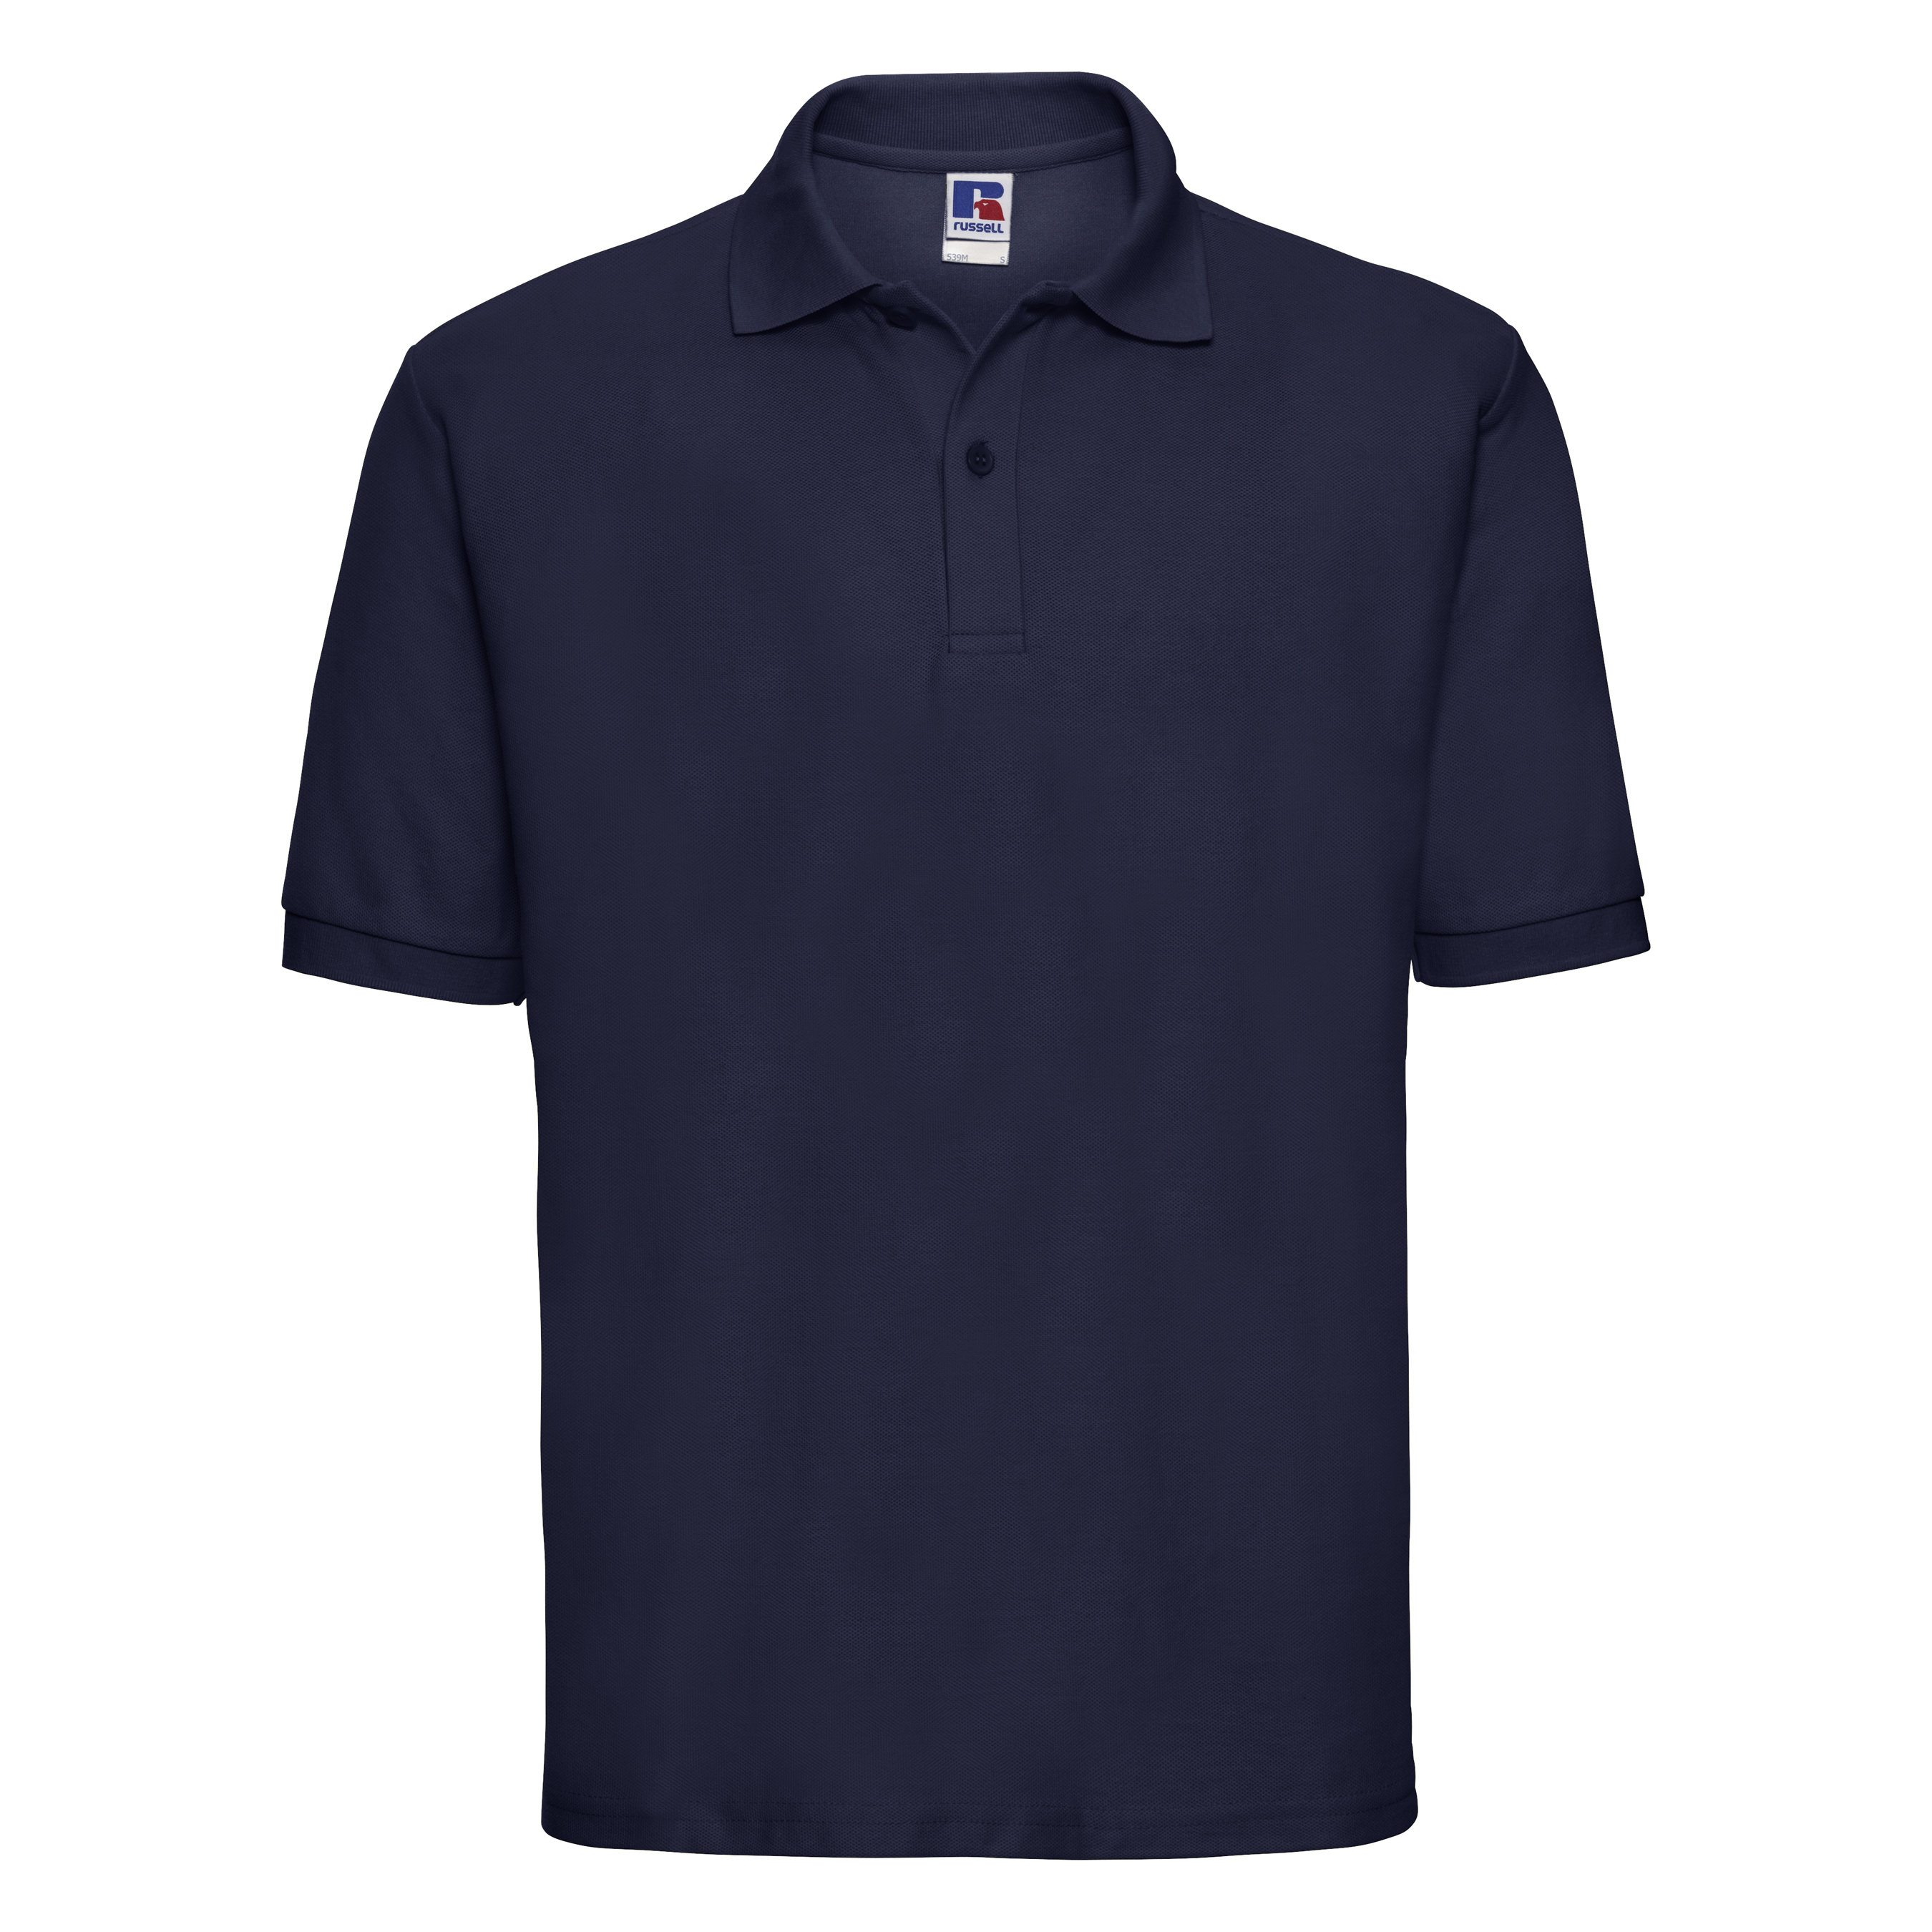 ax-httpswebsystems.s3.amazonaws.comtmp_for_downloadrussell-classic-polycotton-polo-french-navy.jpg